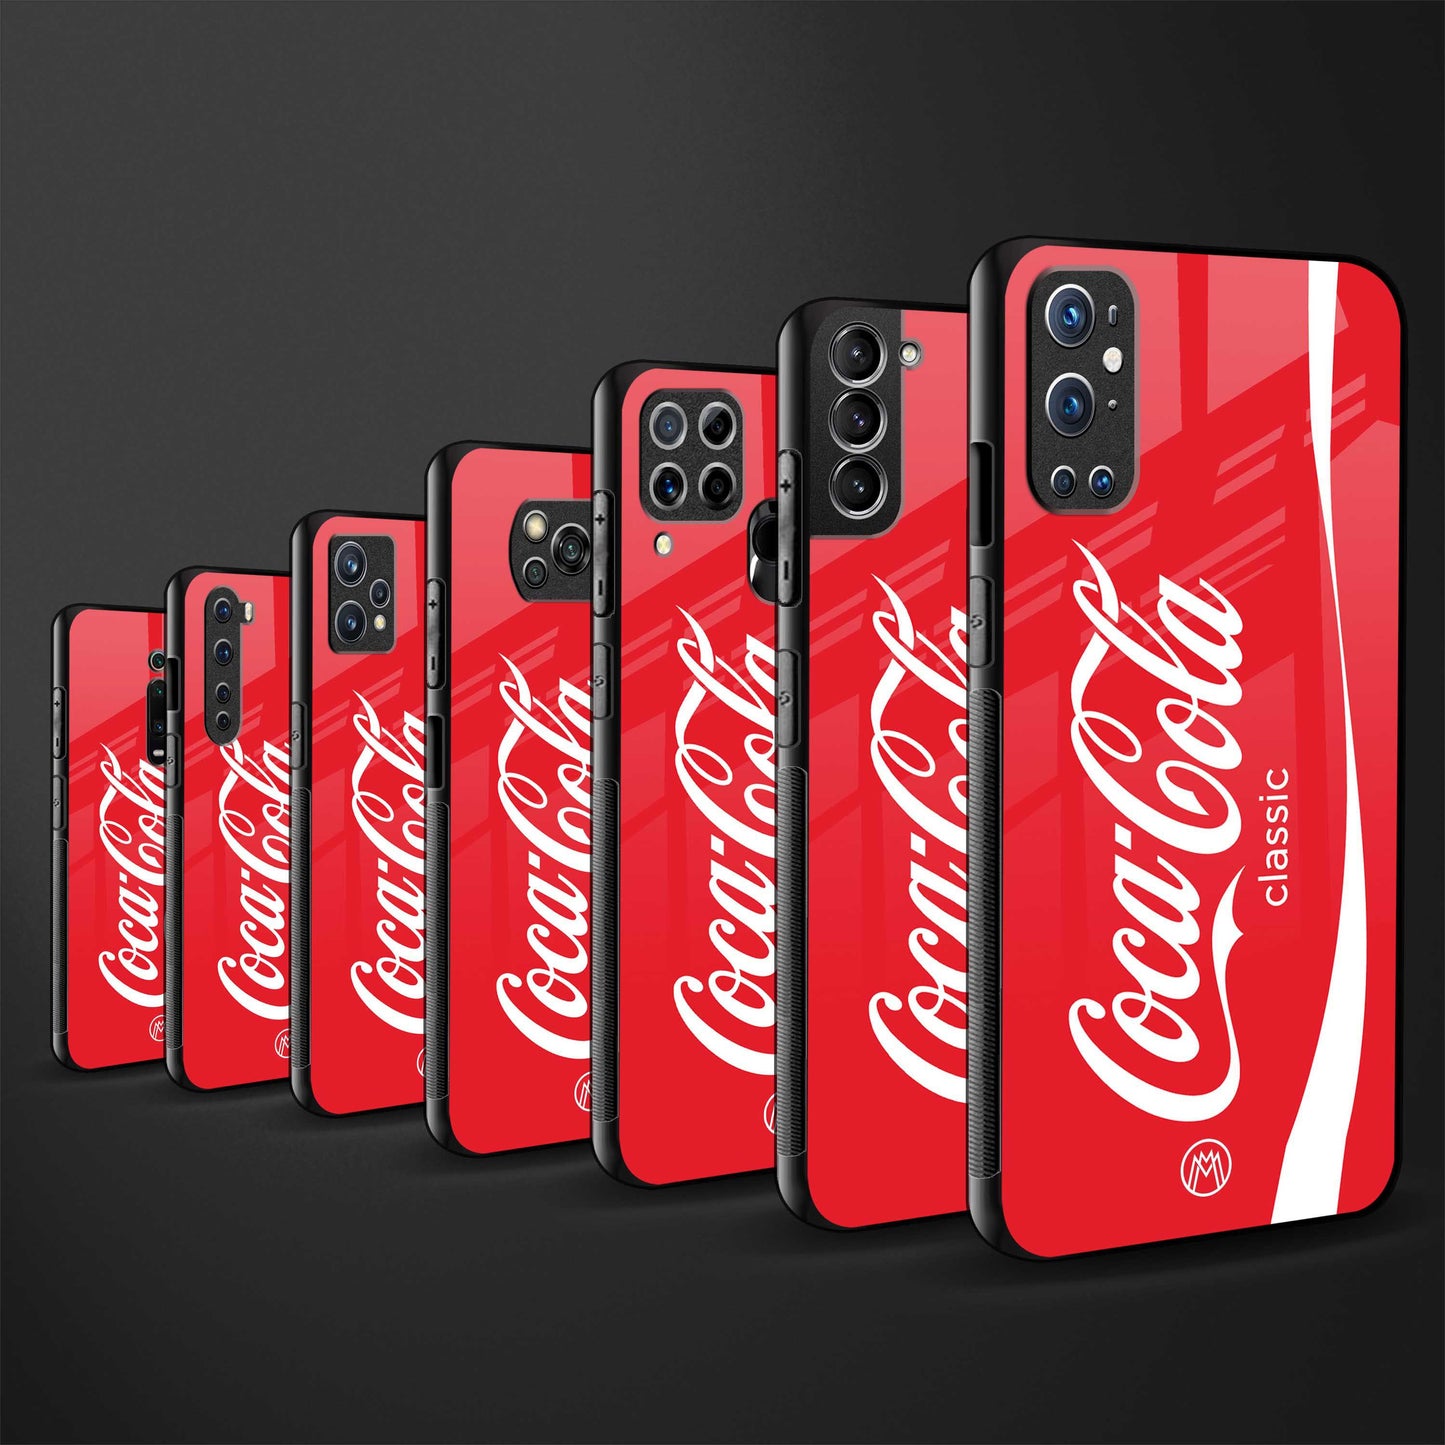 coca cola classic back phone cover | glass case for google pixel 4a 4g